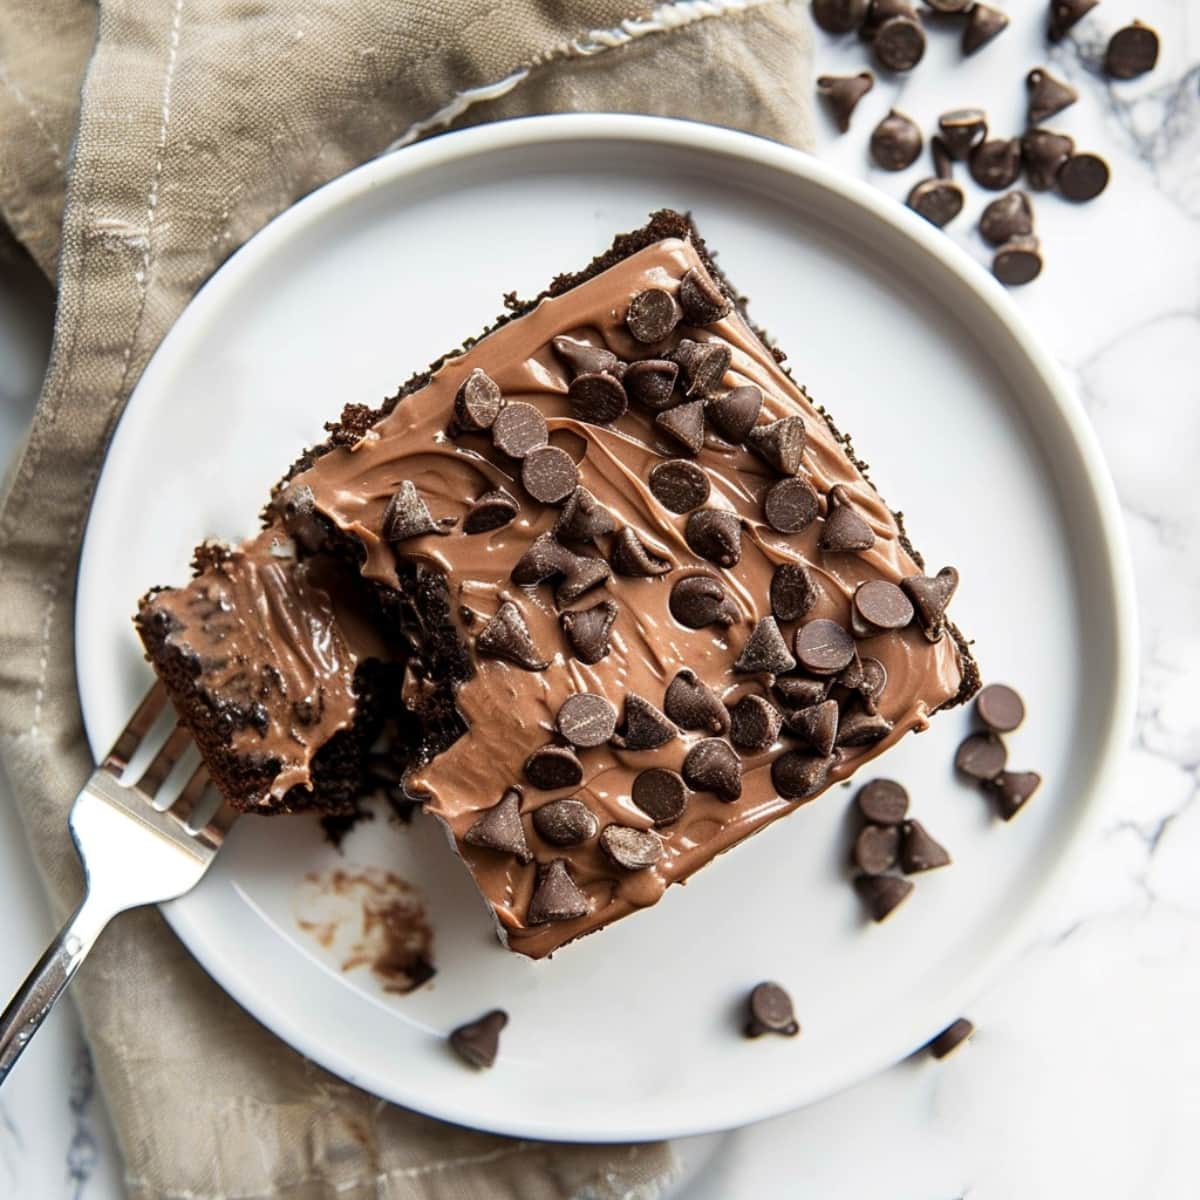 Creamy and decadent chocolate poke cake topped with chocolate chips